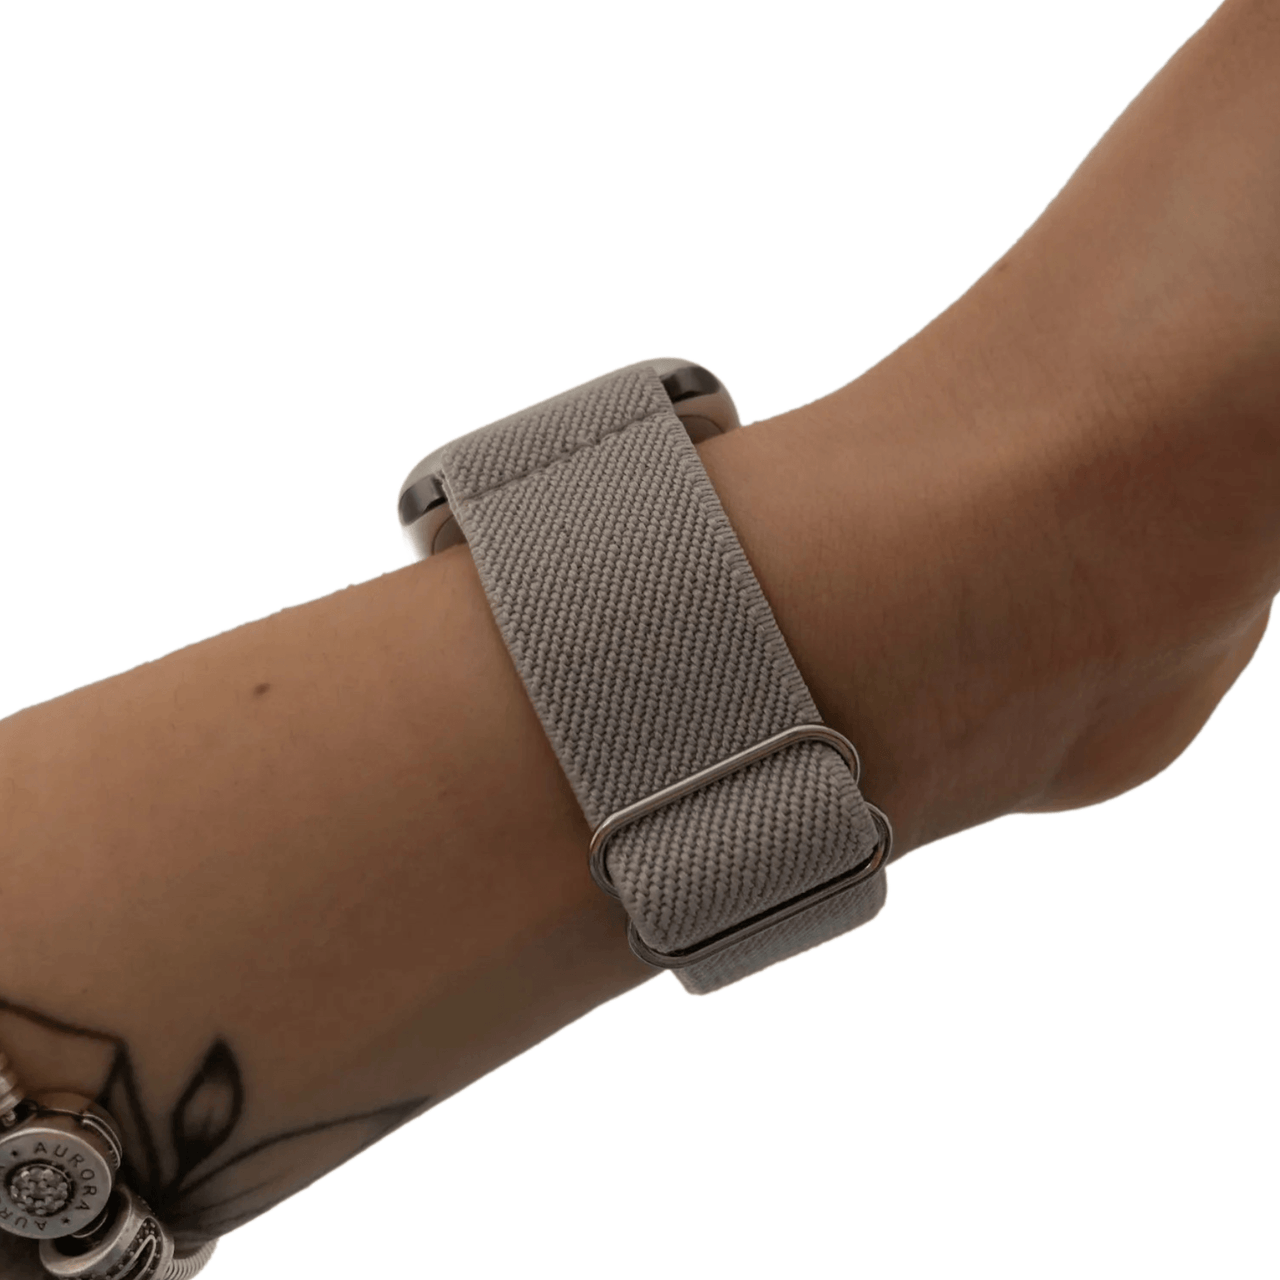 Nylon Clip Strap for Apple Watch - watchband.direct